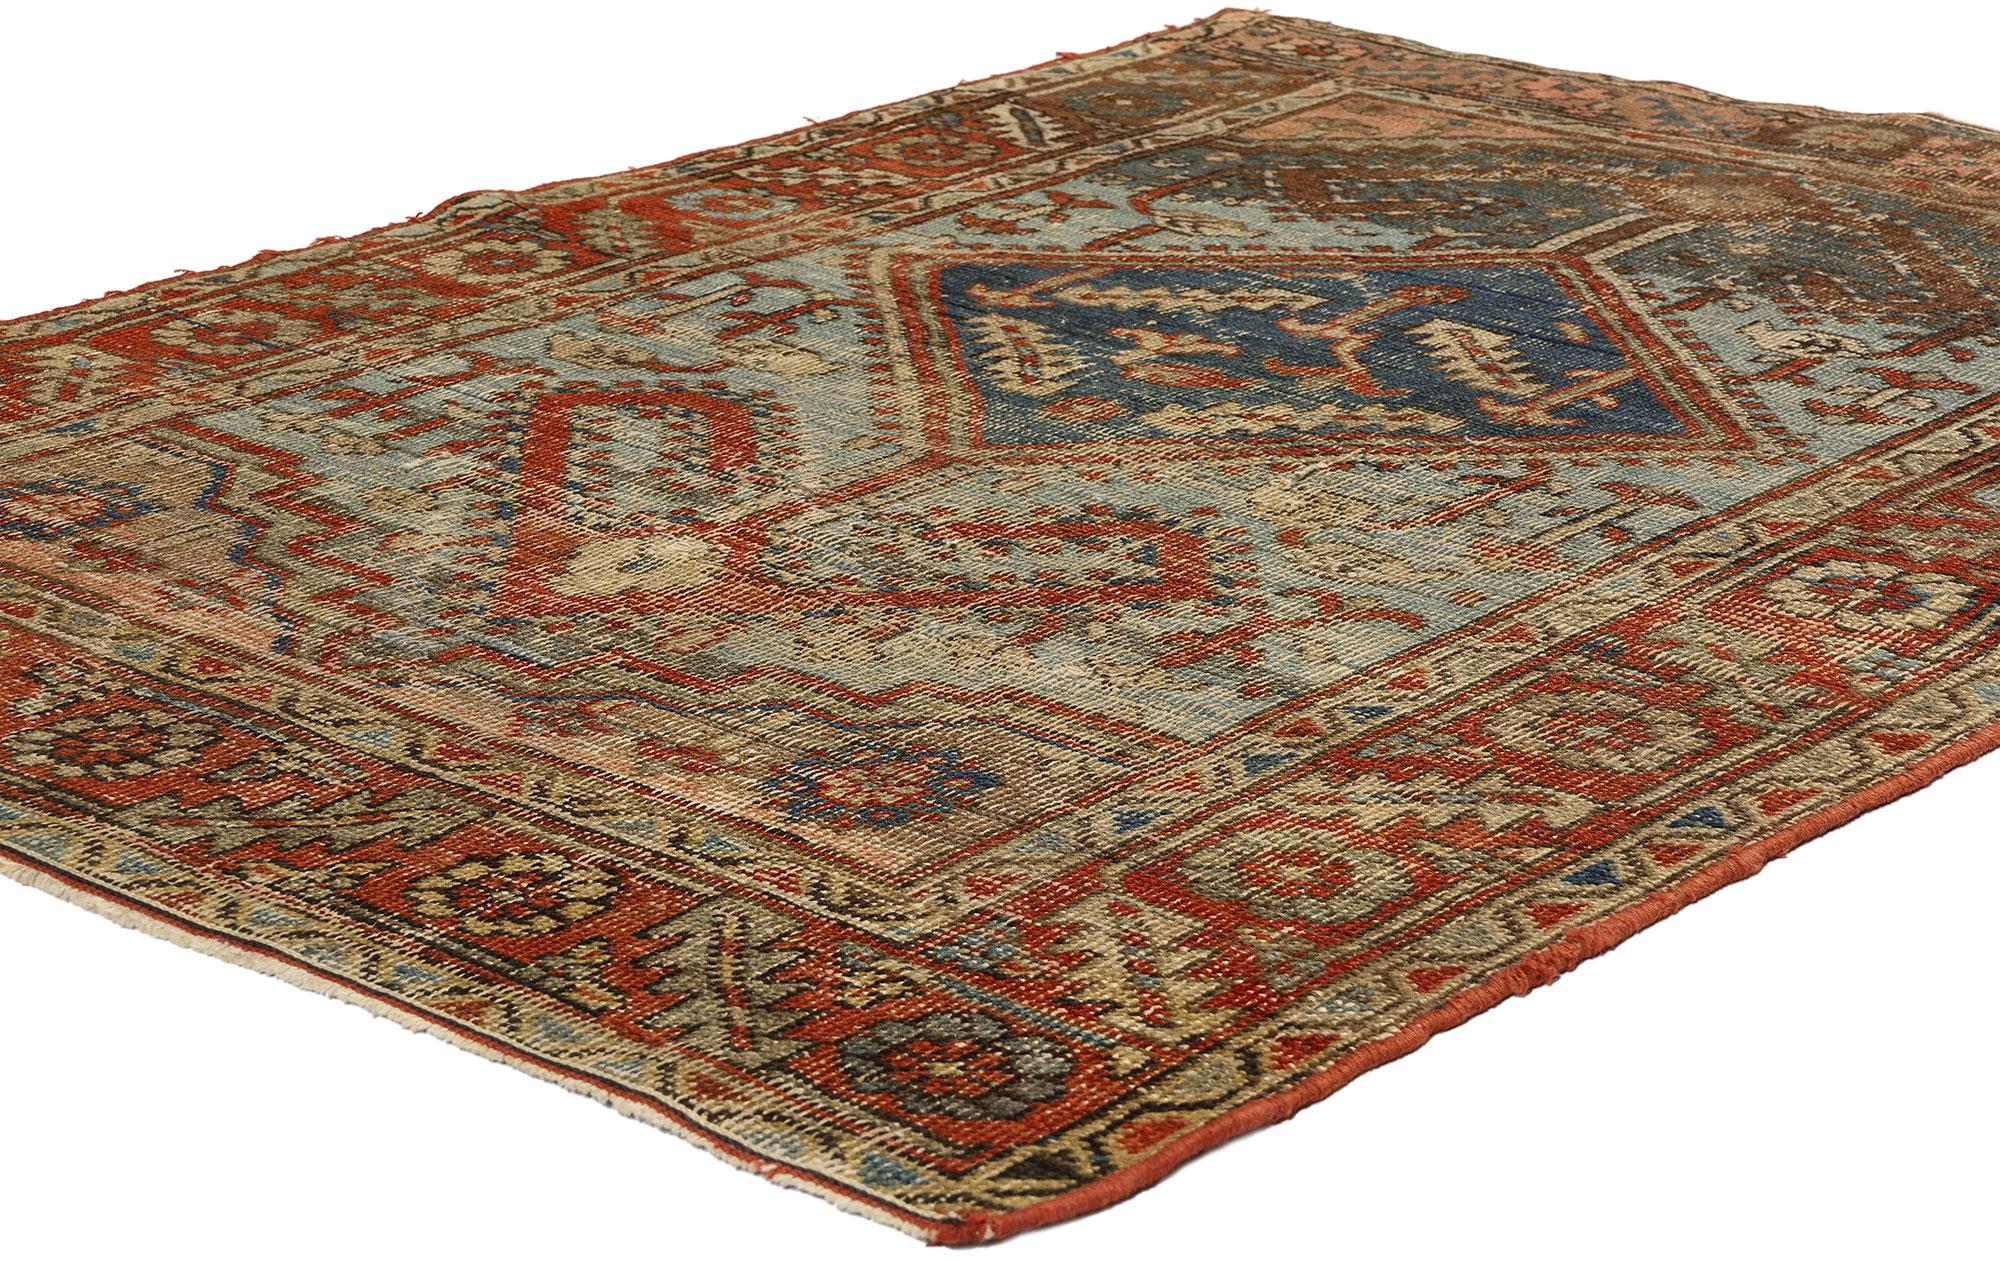 78672 Antique-Worn Persian Bakshaish Rug, 03'07 x 05'01. Persian Bakshaish rugs, originating from the village of Bakshaish in Northwestern Iran, are renowned for their bold geometric designs, vibrant earthy colors, and exceptional craftsmanship.